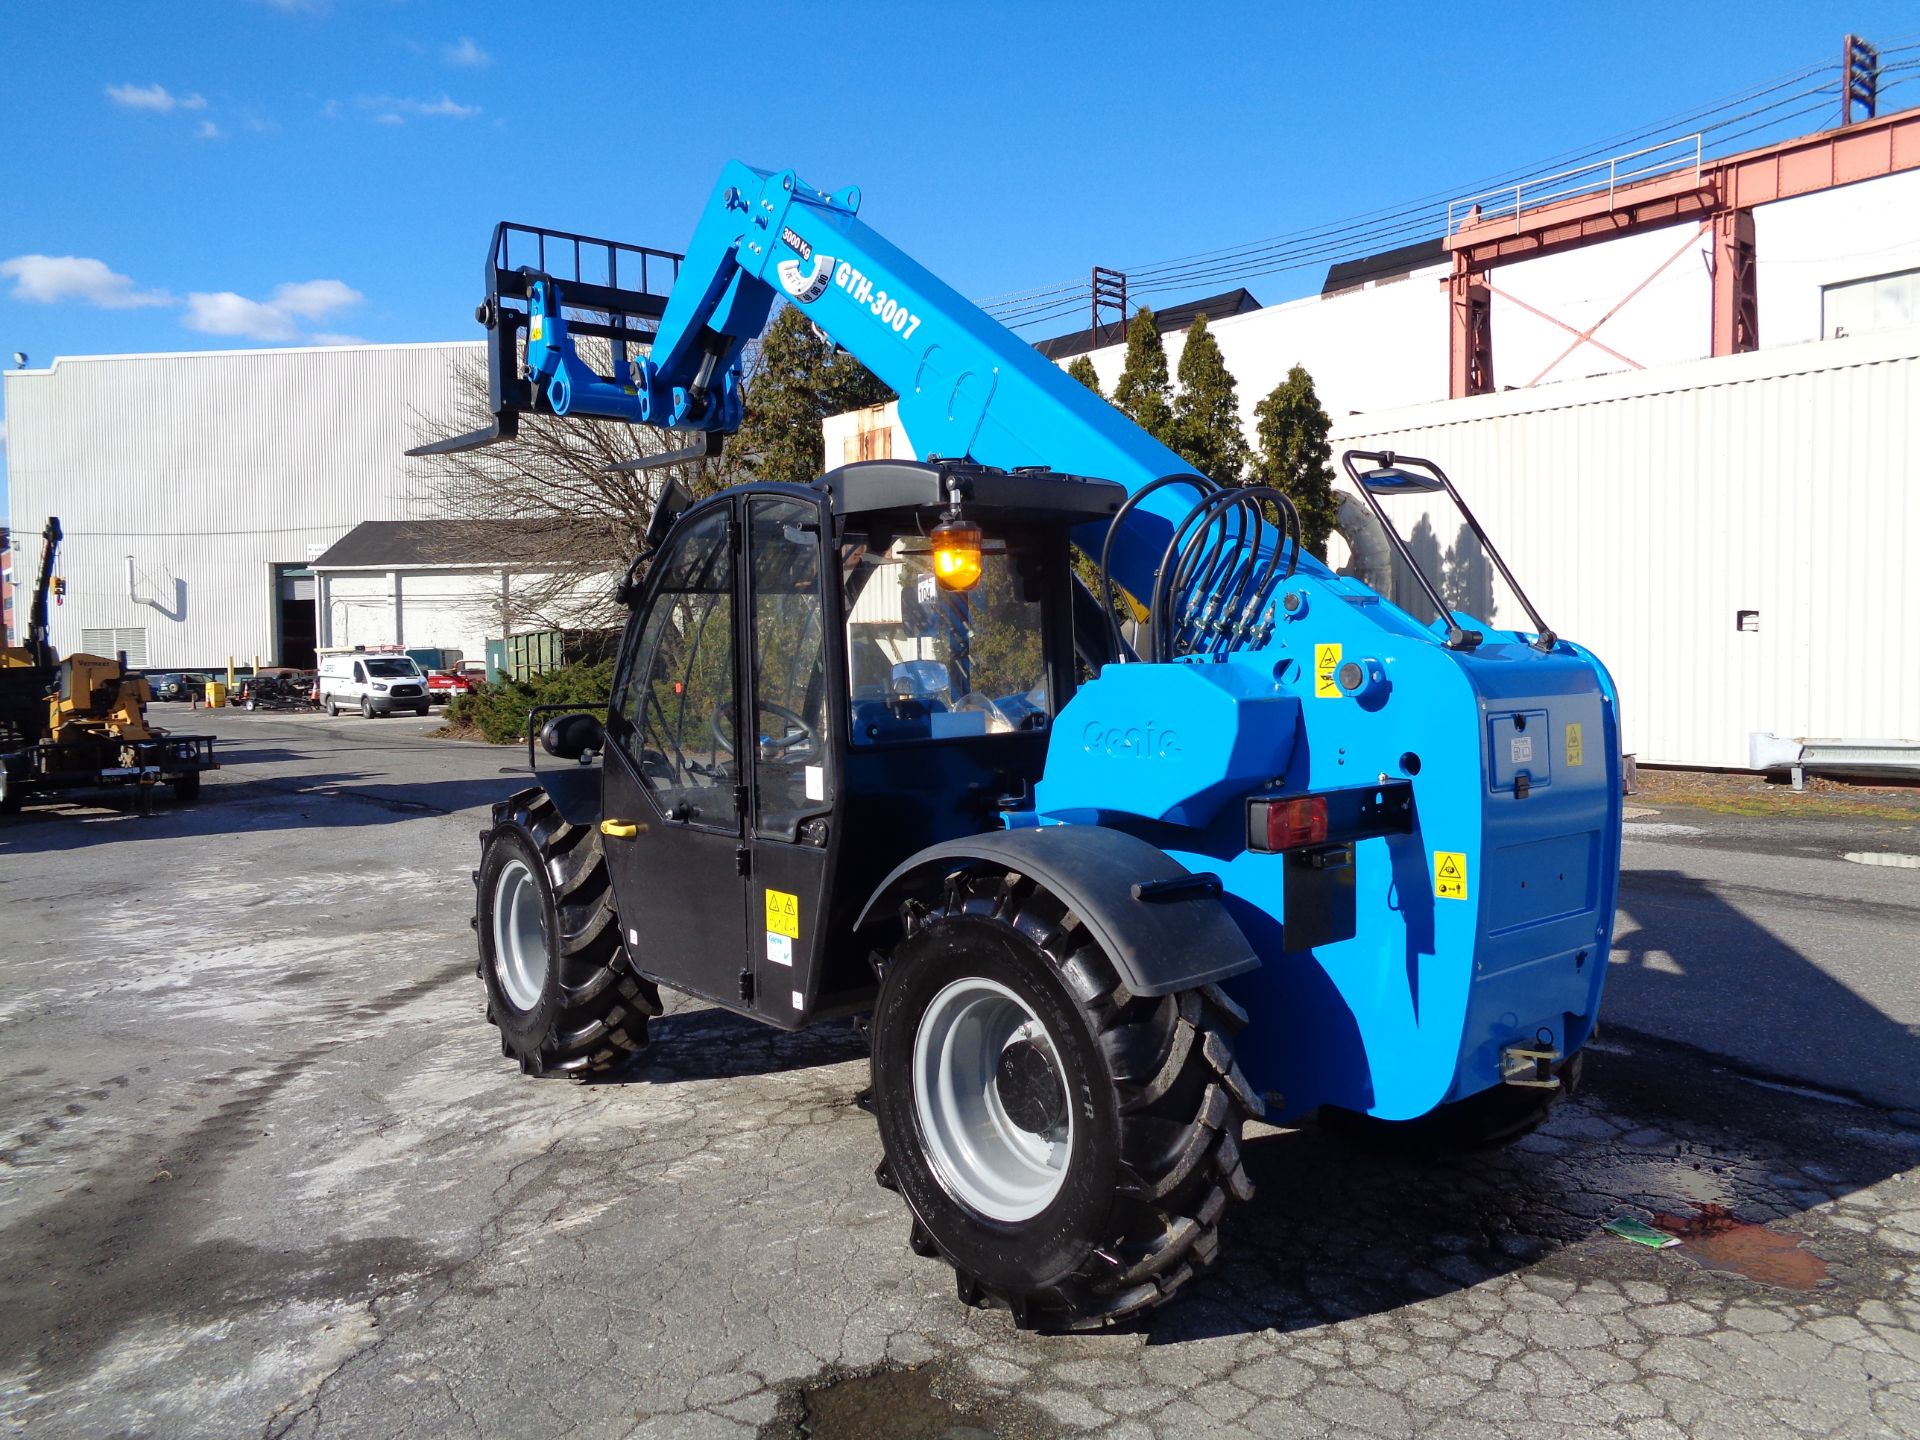 New Unused 2018 Genie GTH3007 Telescopic Forklift 6,600 lbs - Enclosed Cab - Image 15 of 23